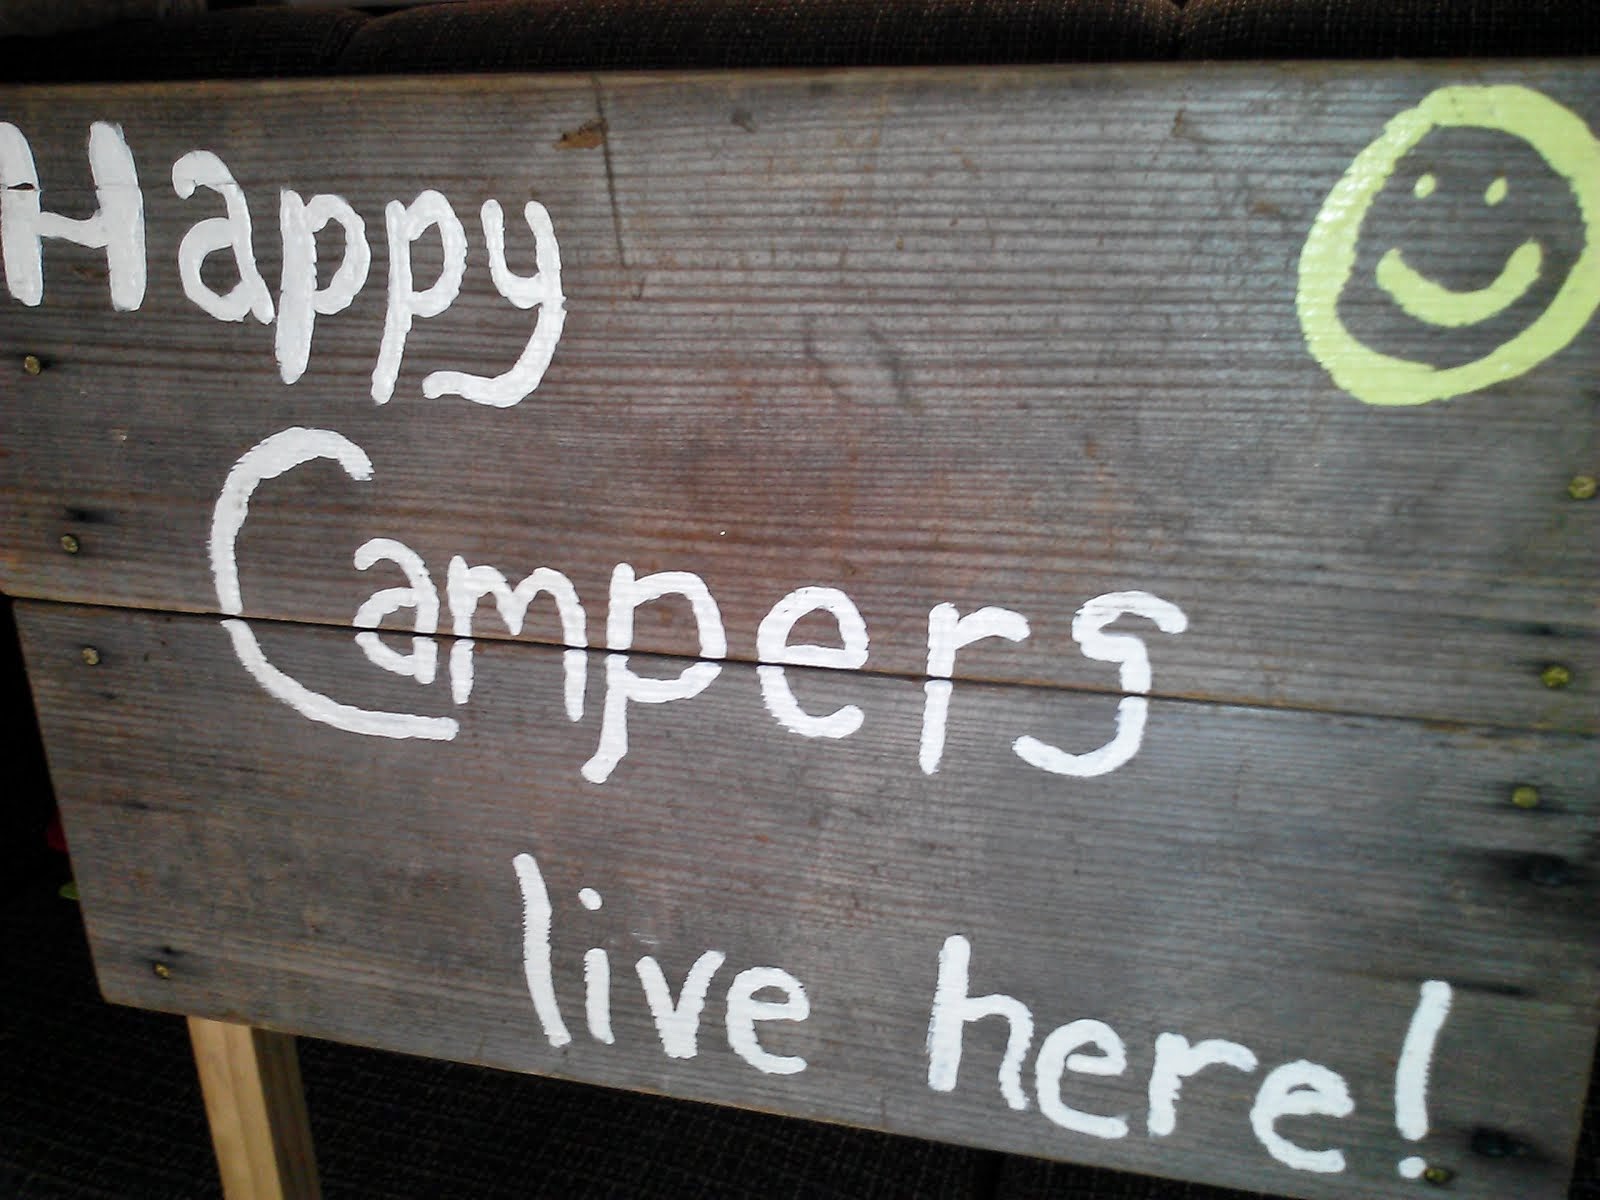 We are the Happy Campers